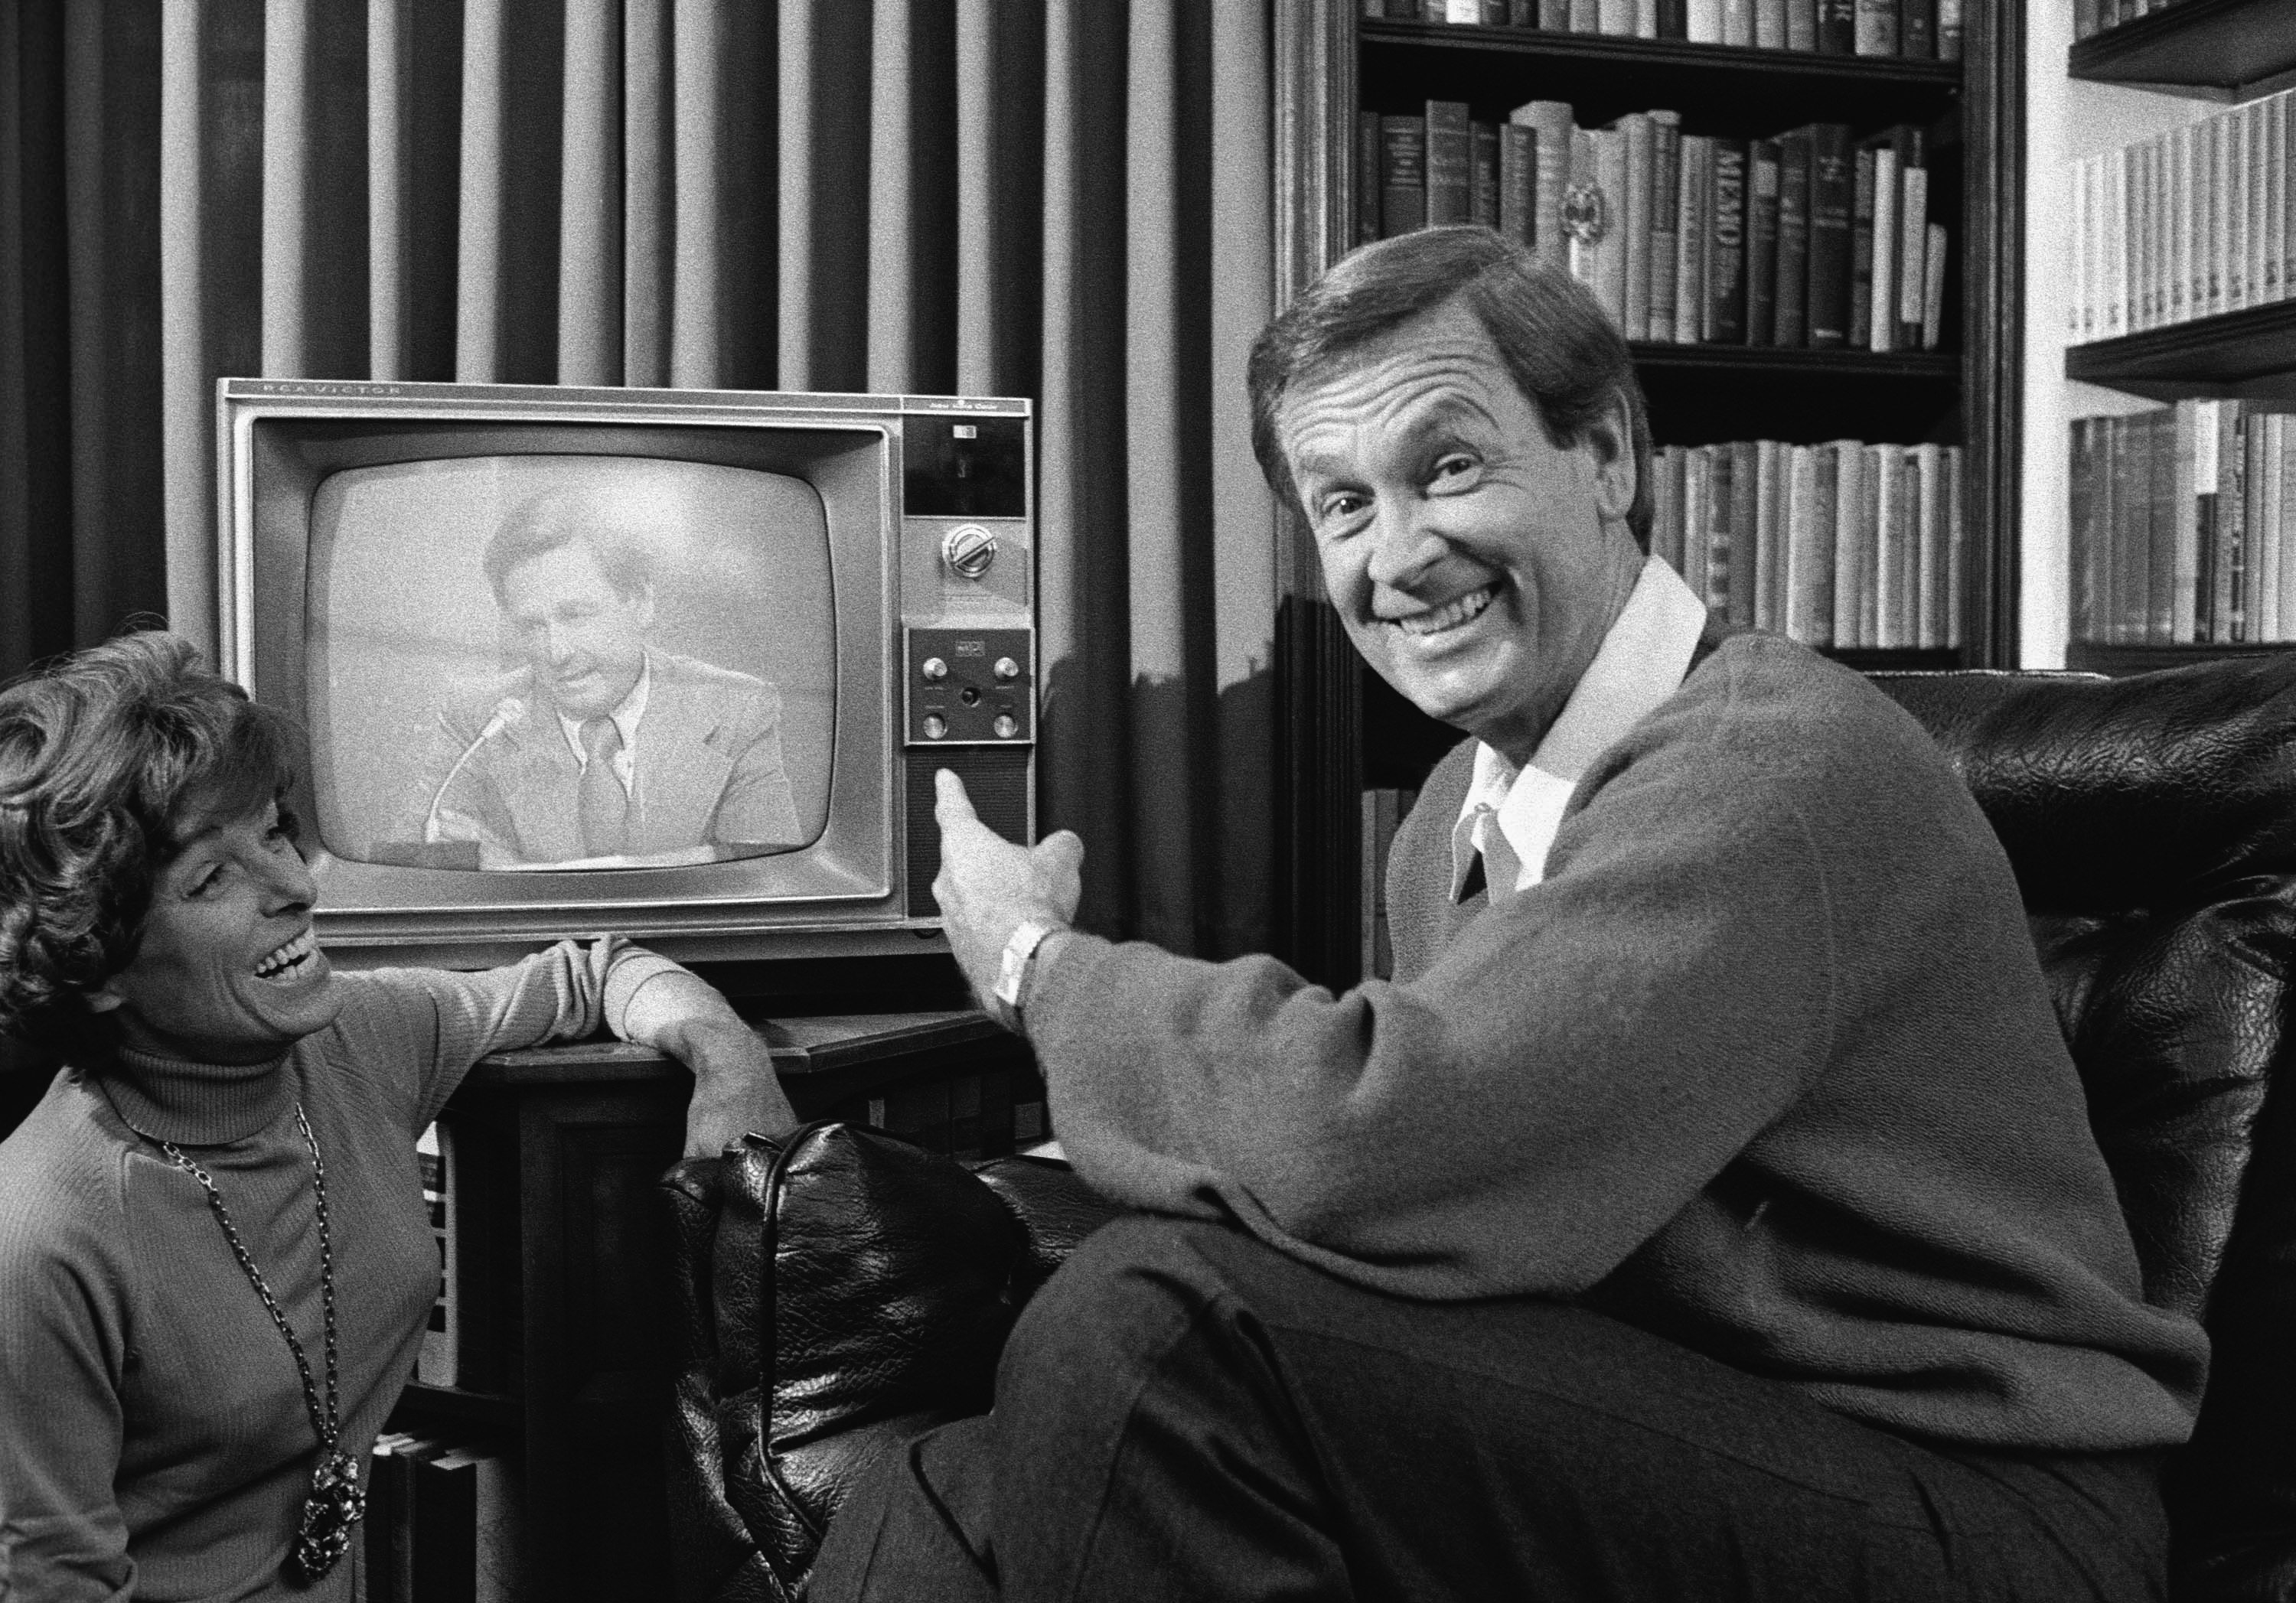 American game show host Bob Barker looks at the camera and smiles while he points to himself on a nearby television screen as his wife Dorothy Jo Barker (1924 - 1981) looks on and laughs, November 4, 1977. | Source: Getty Images